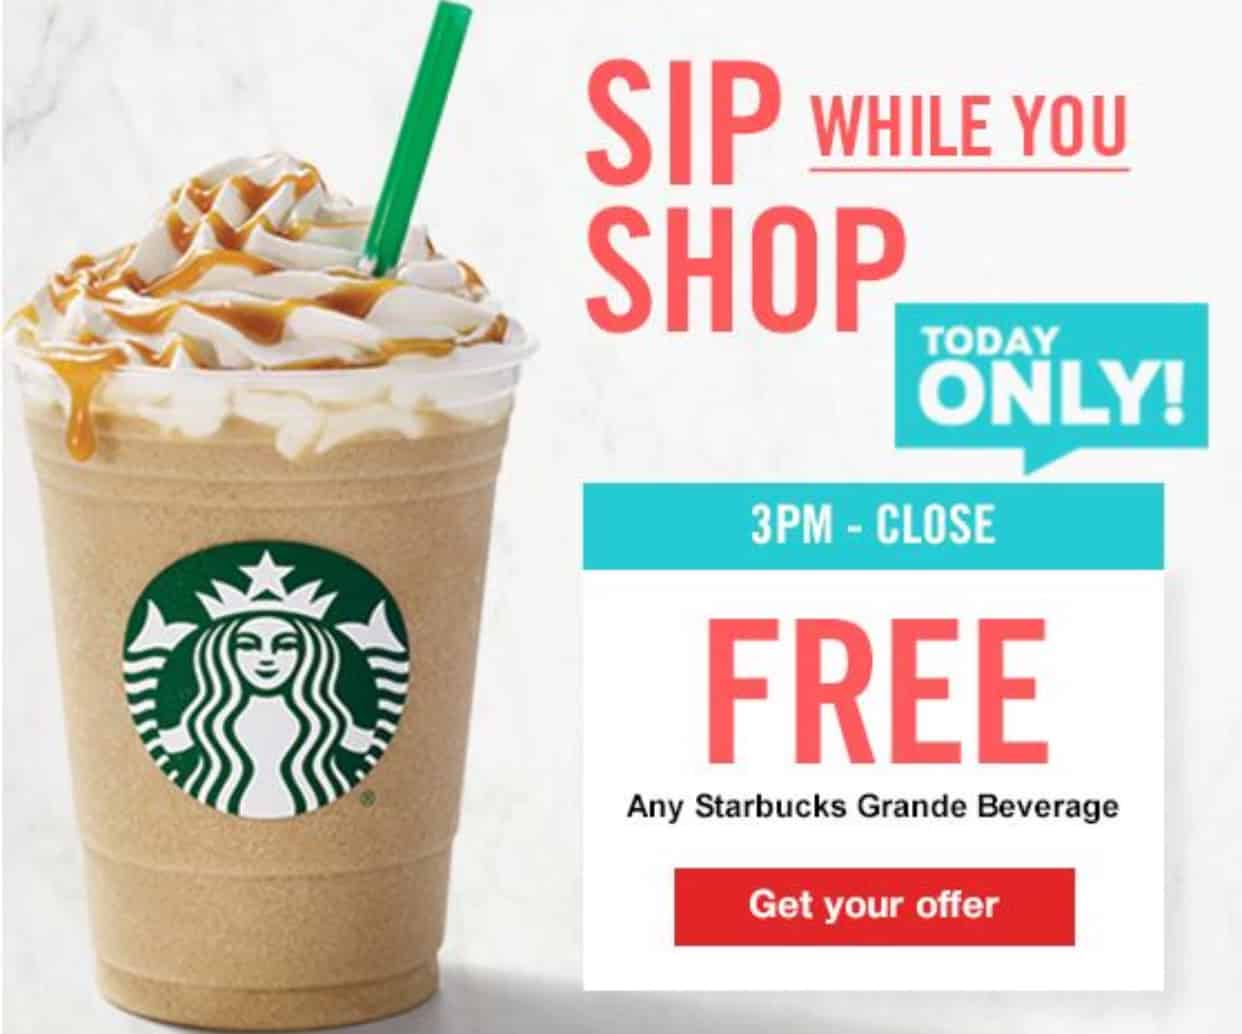 Giant Free Starbucks Grande Beverage Today Only